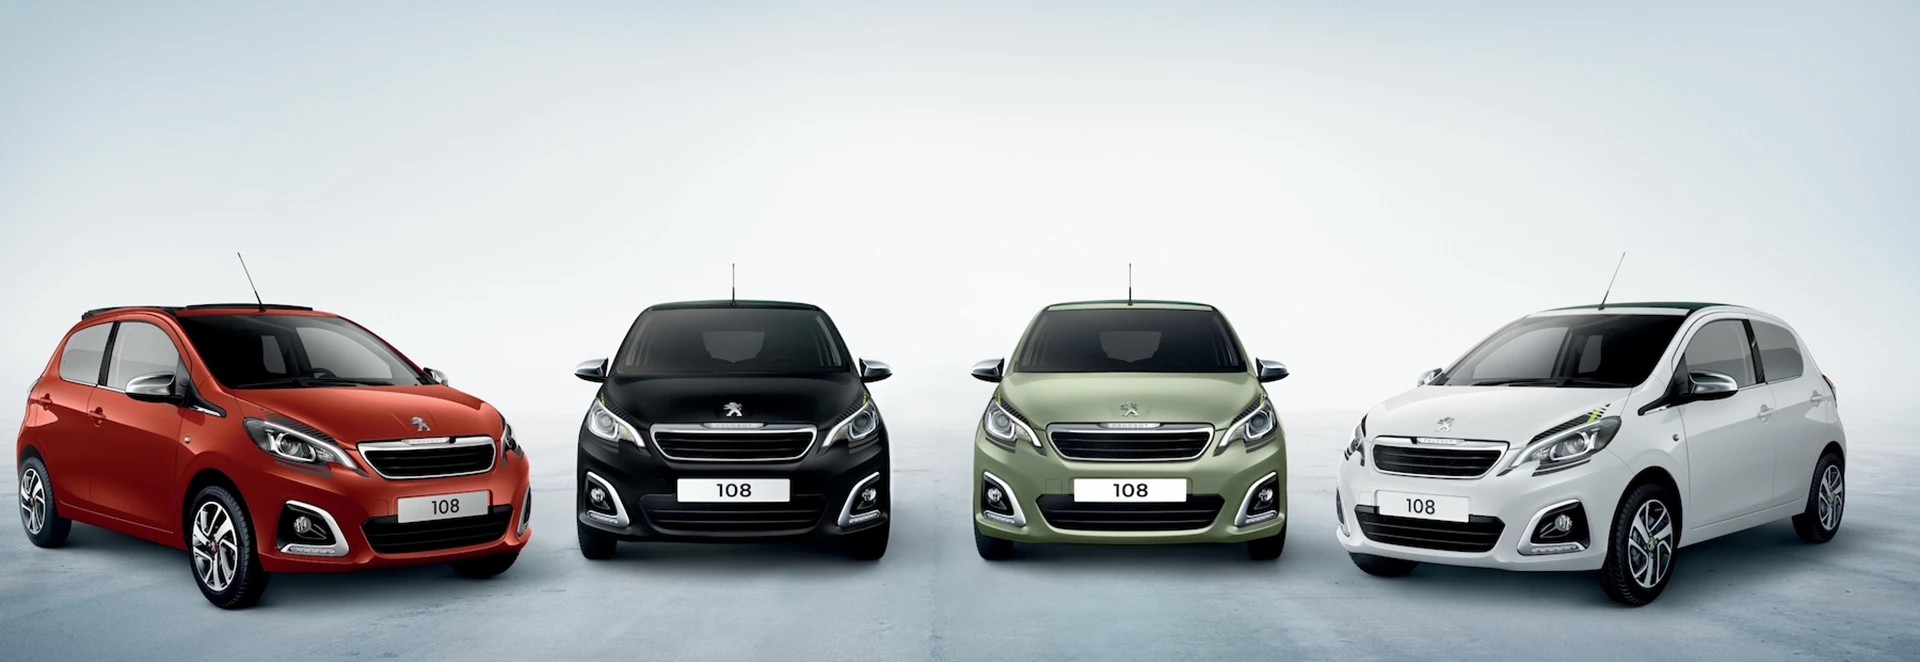 Buyer's guide to the Peugeot 108 